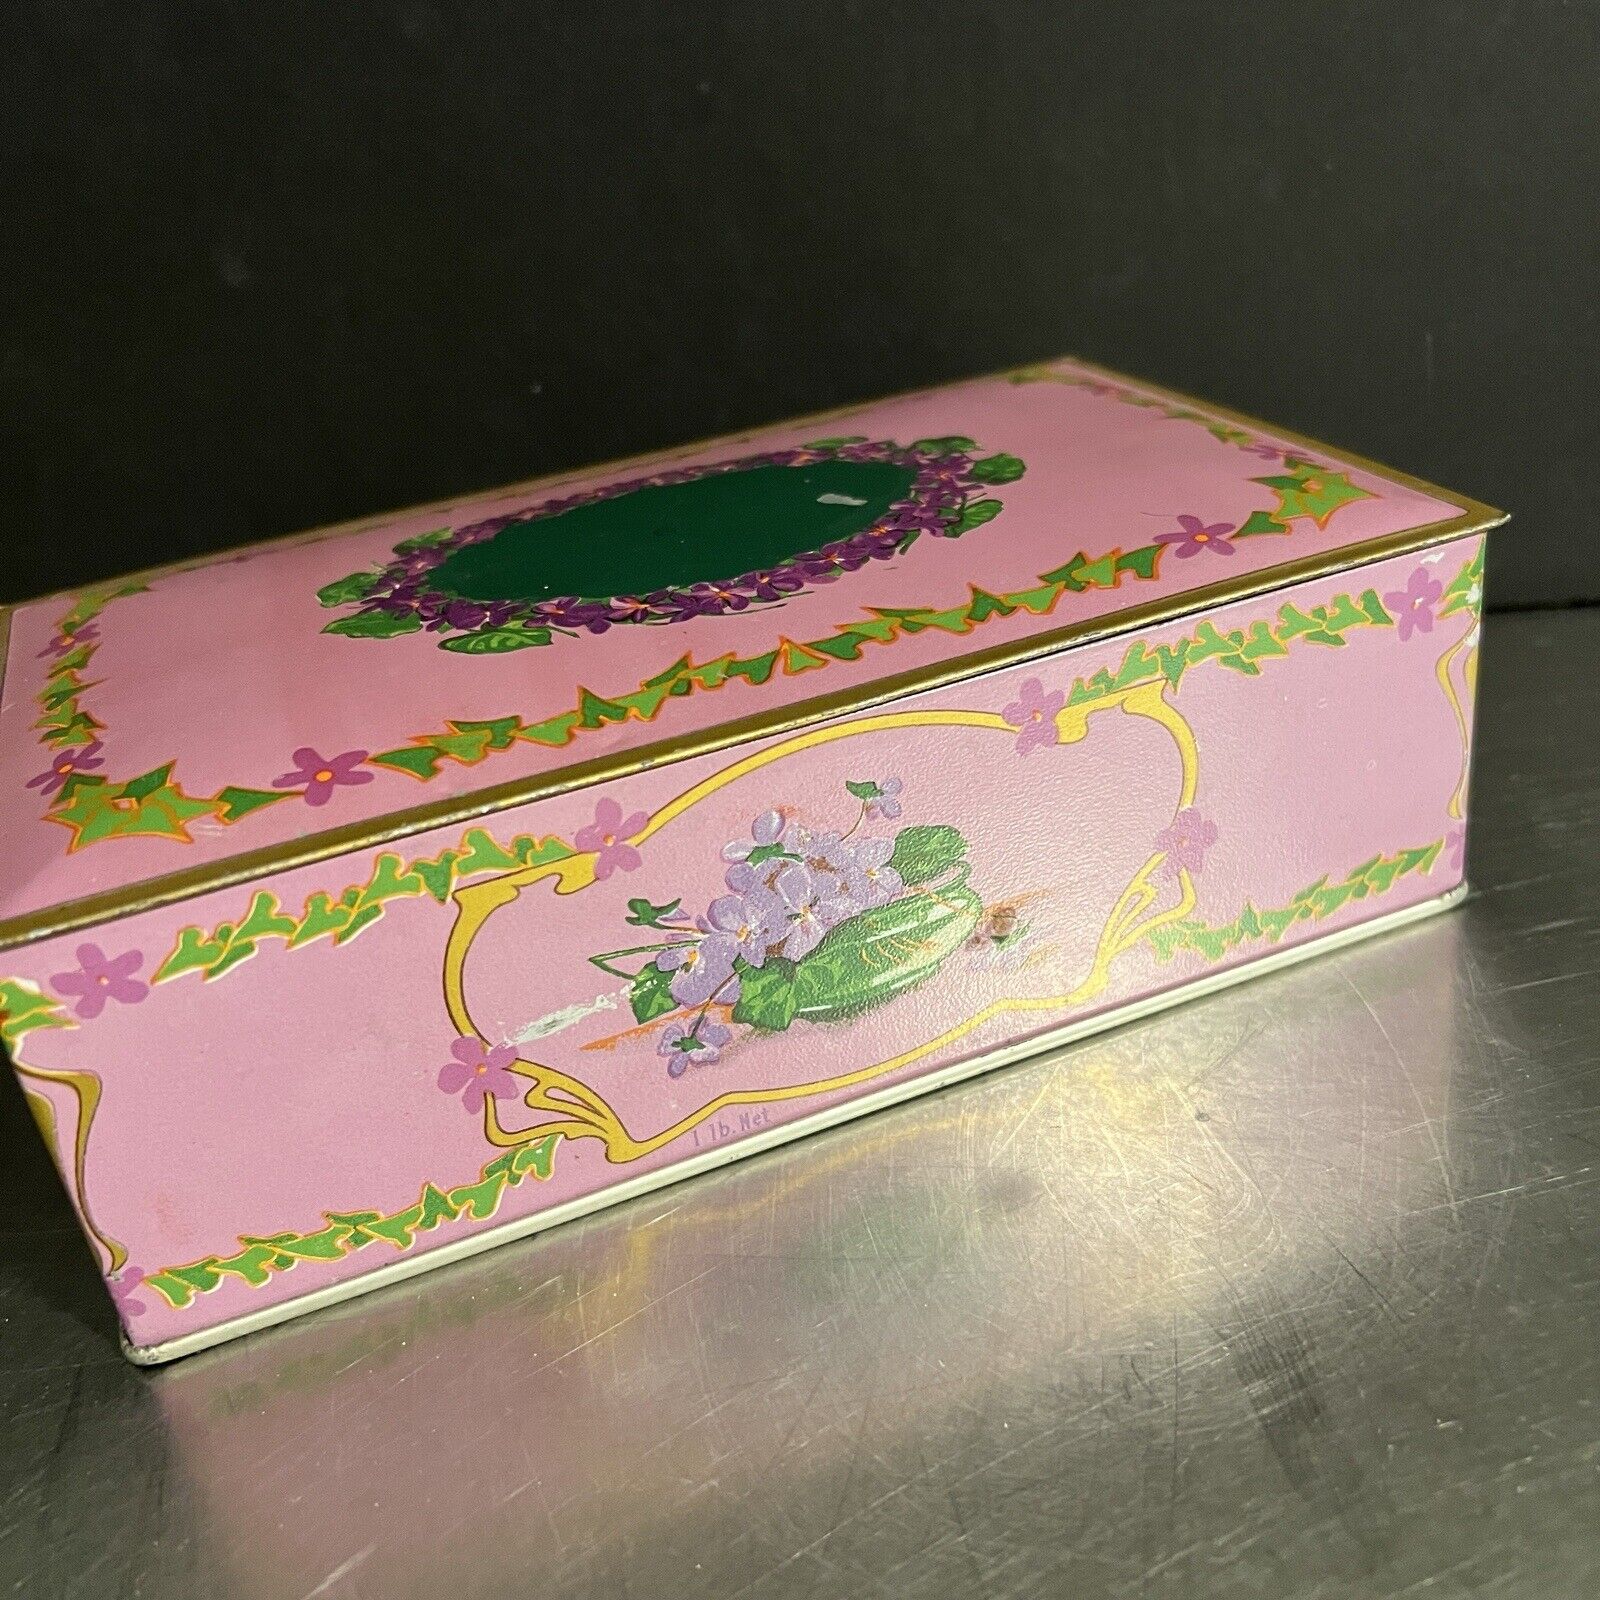 Vintage Canco Louis Sherry Candy Tin Hinged Box Violets See Description As Is